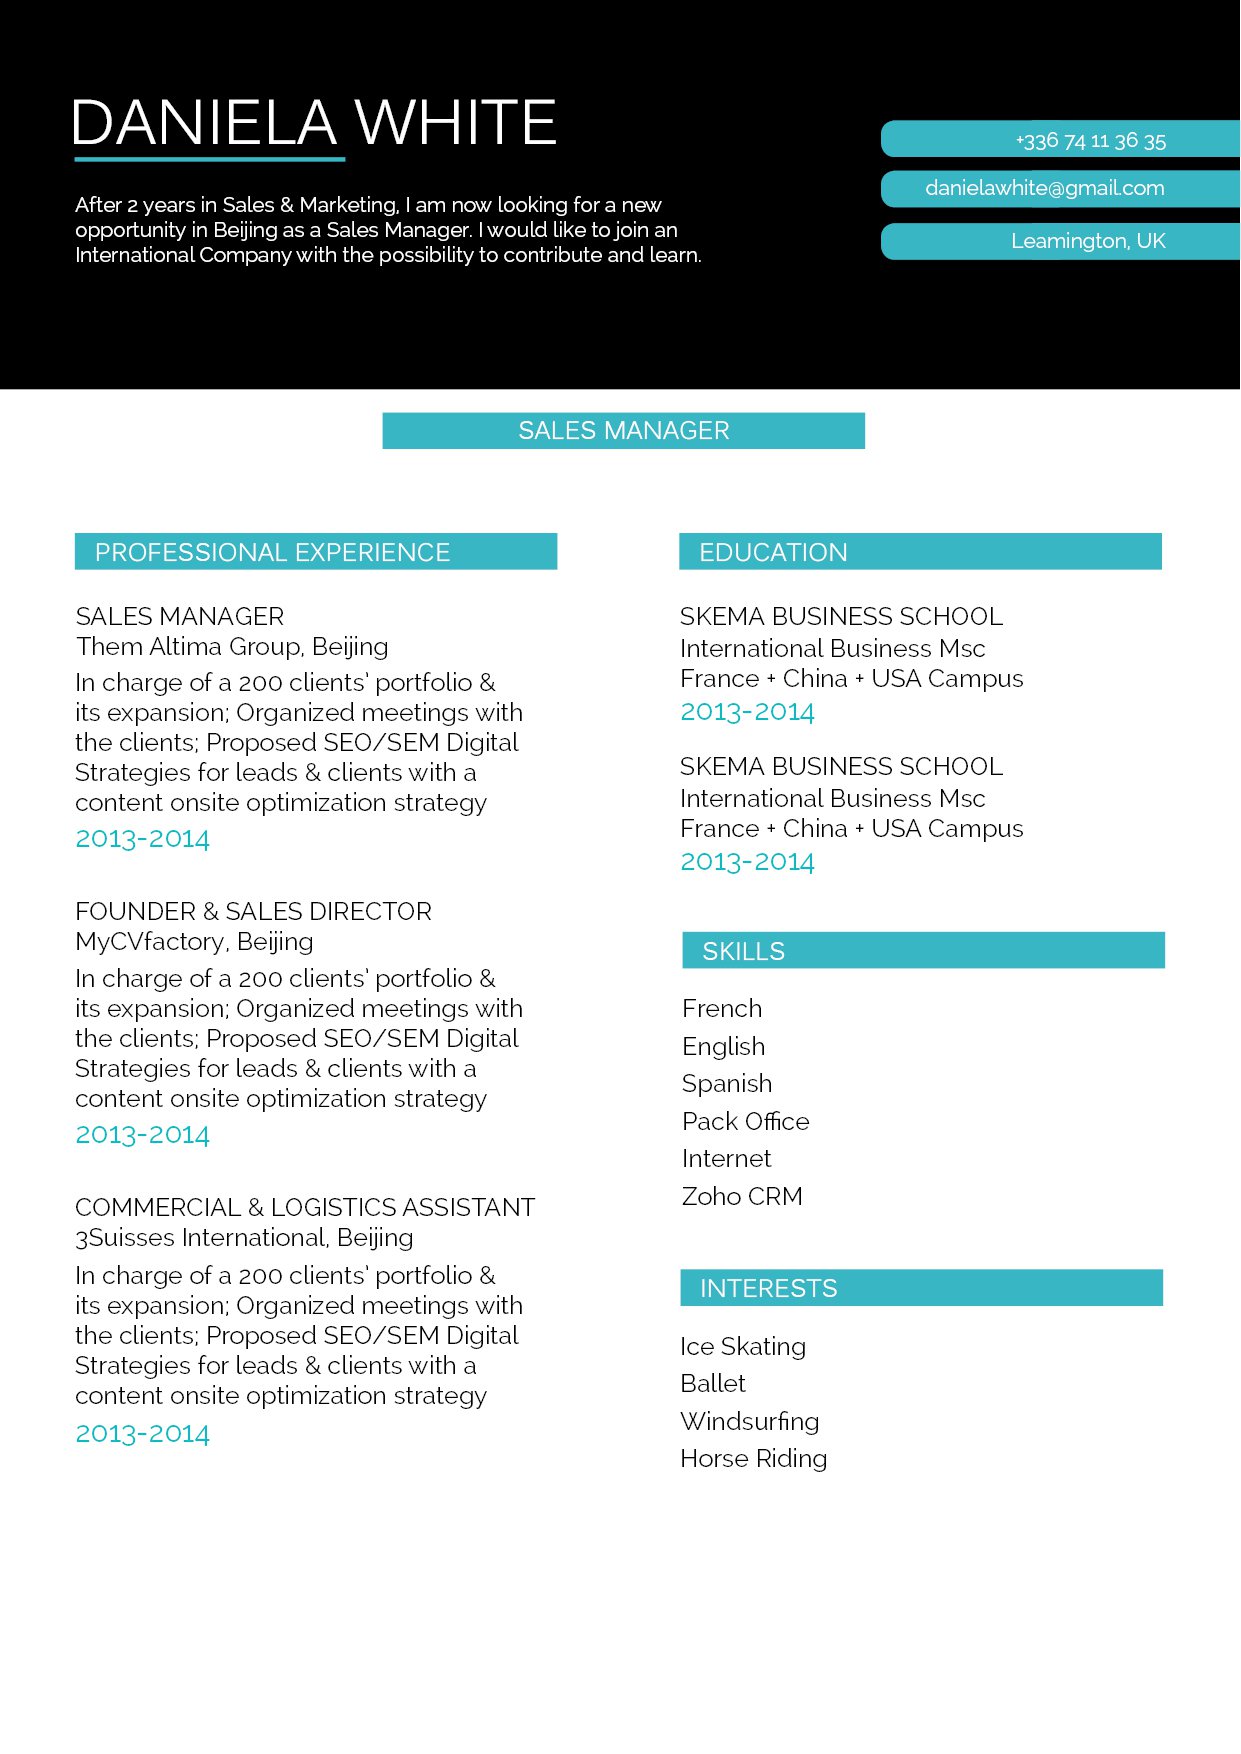 Use this creative eformat to make a good resume!